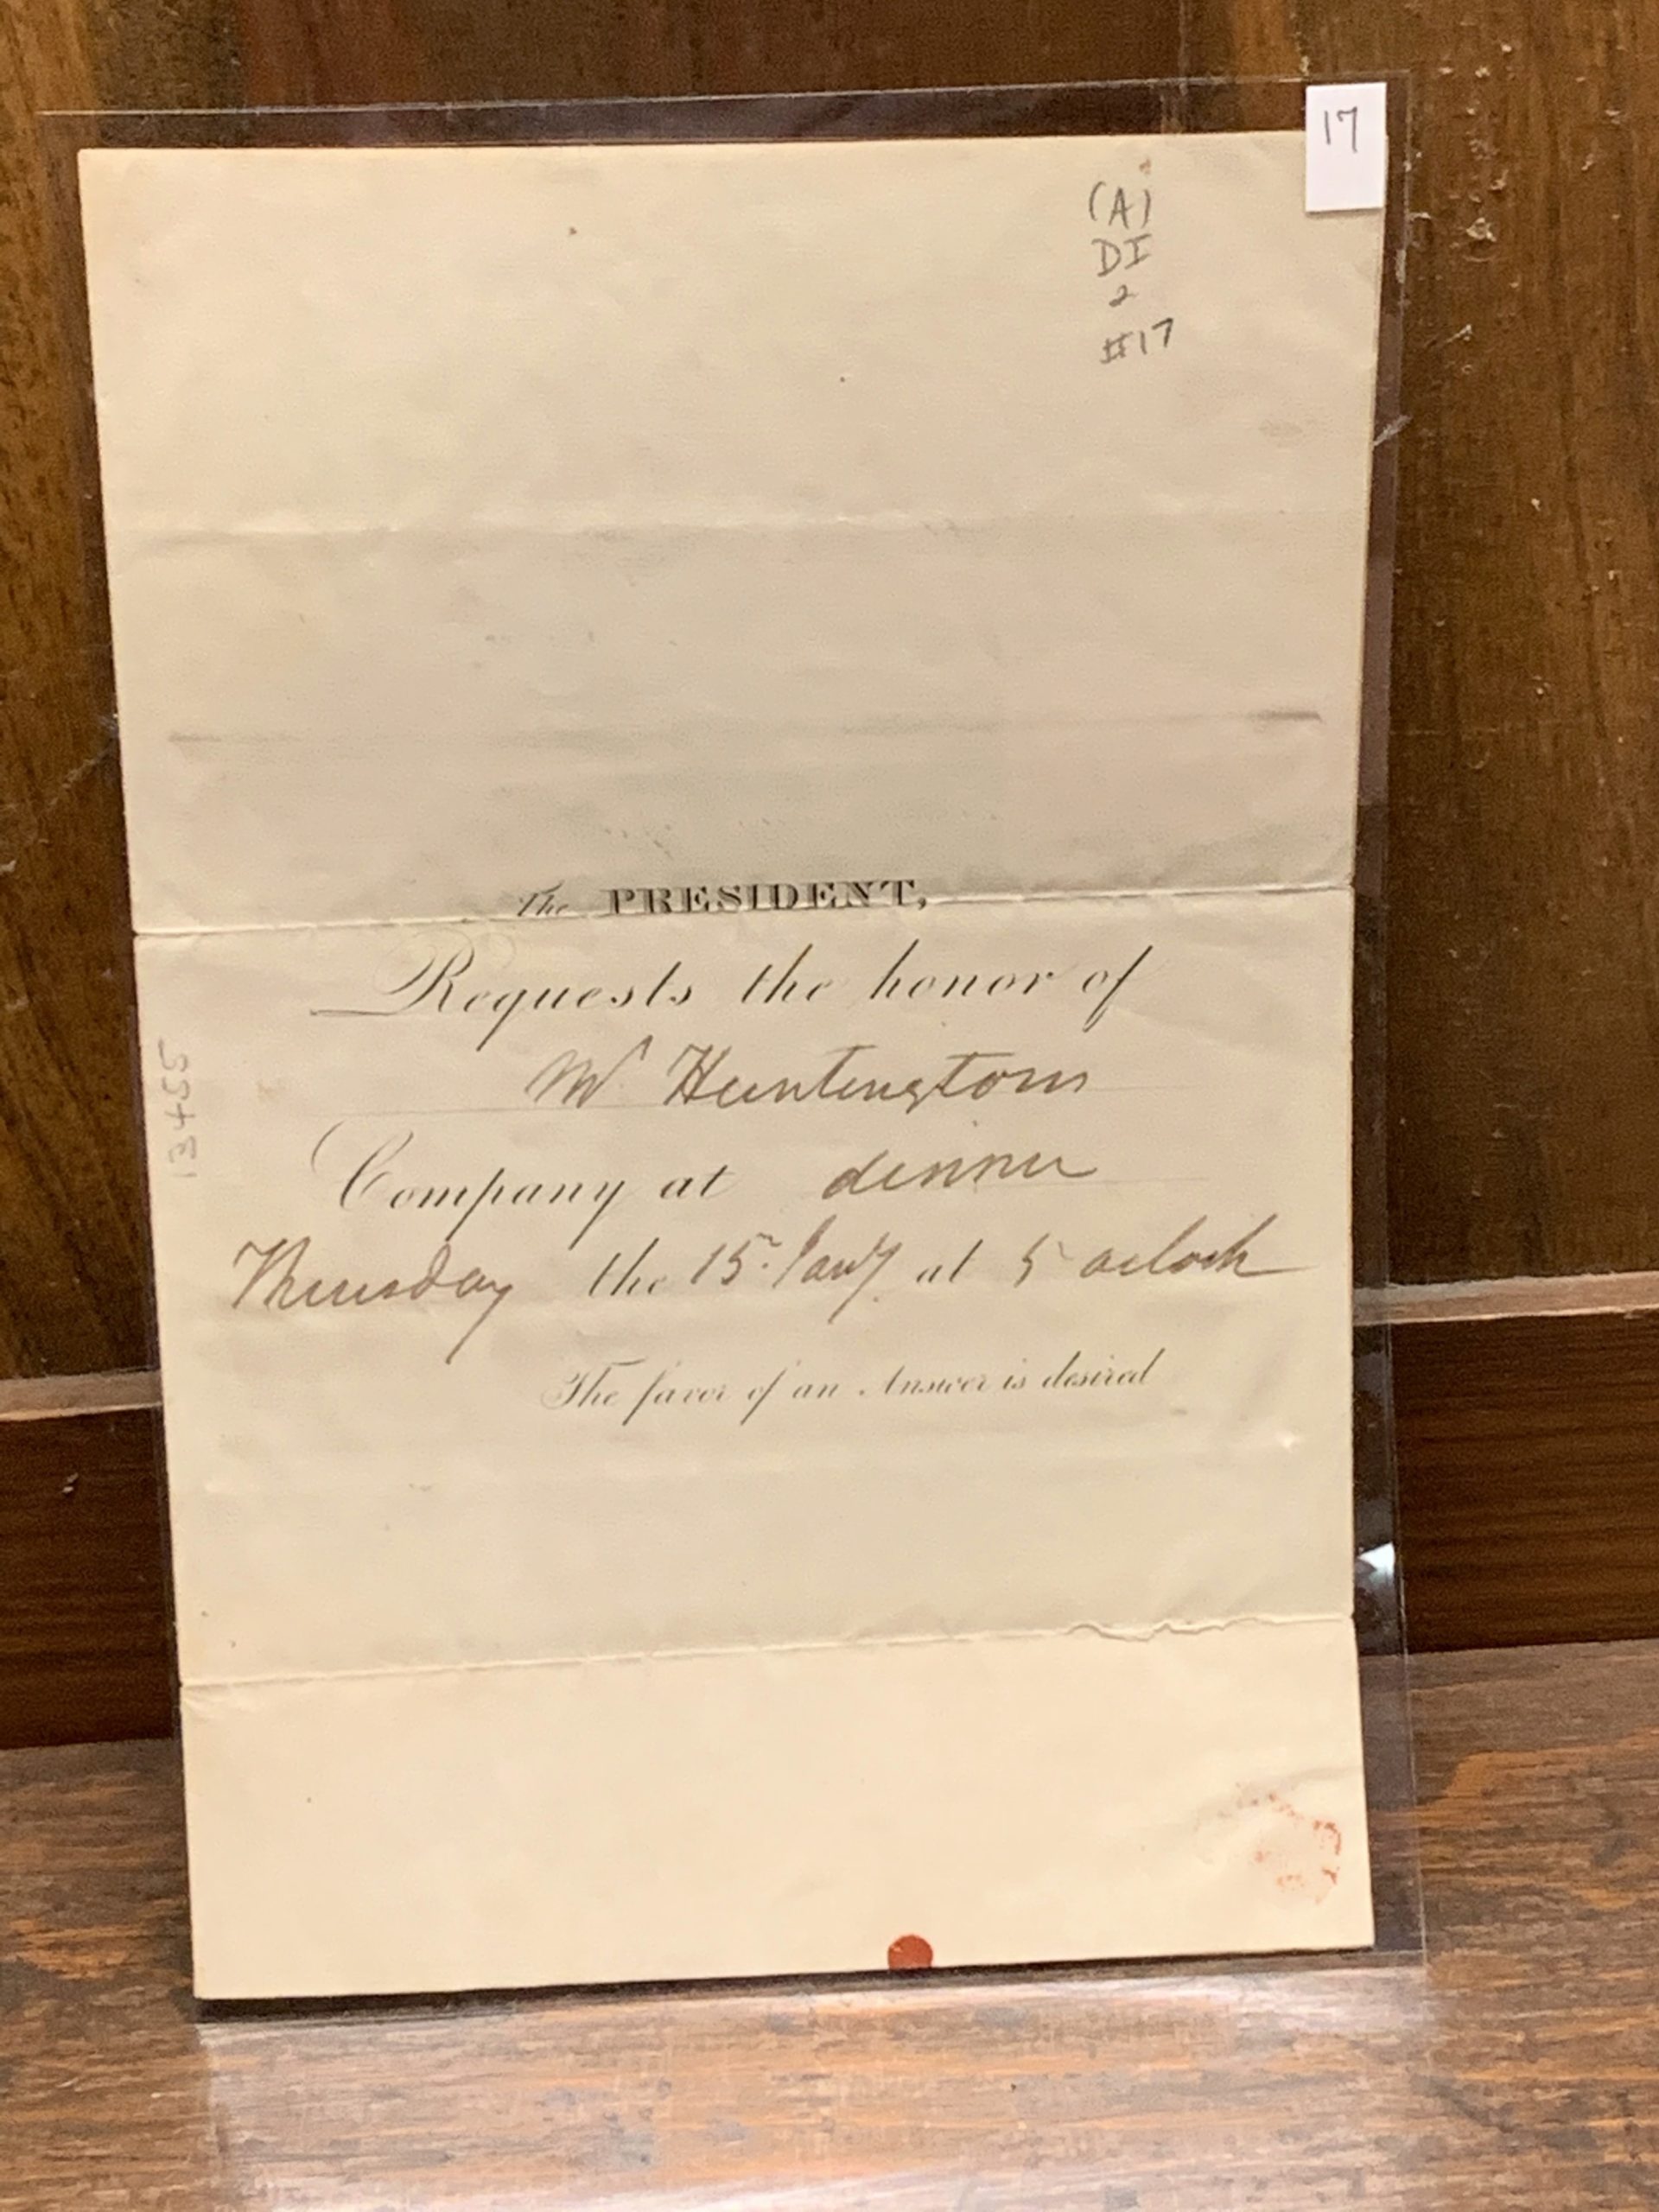 An invitation to an event from President Andrew Jackson to Abel Huntington.